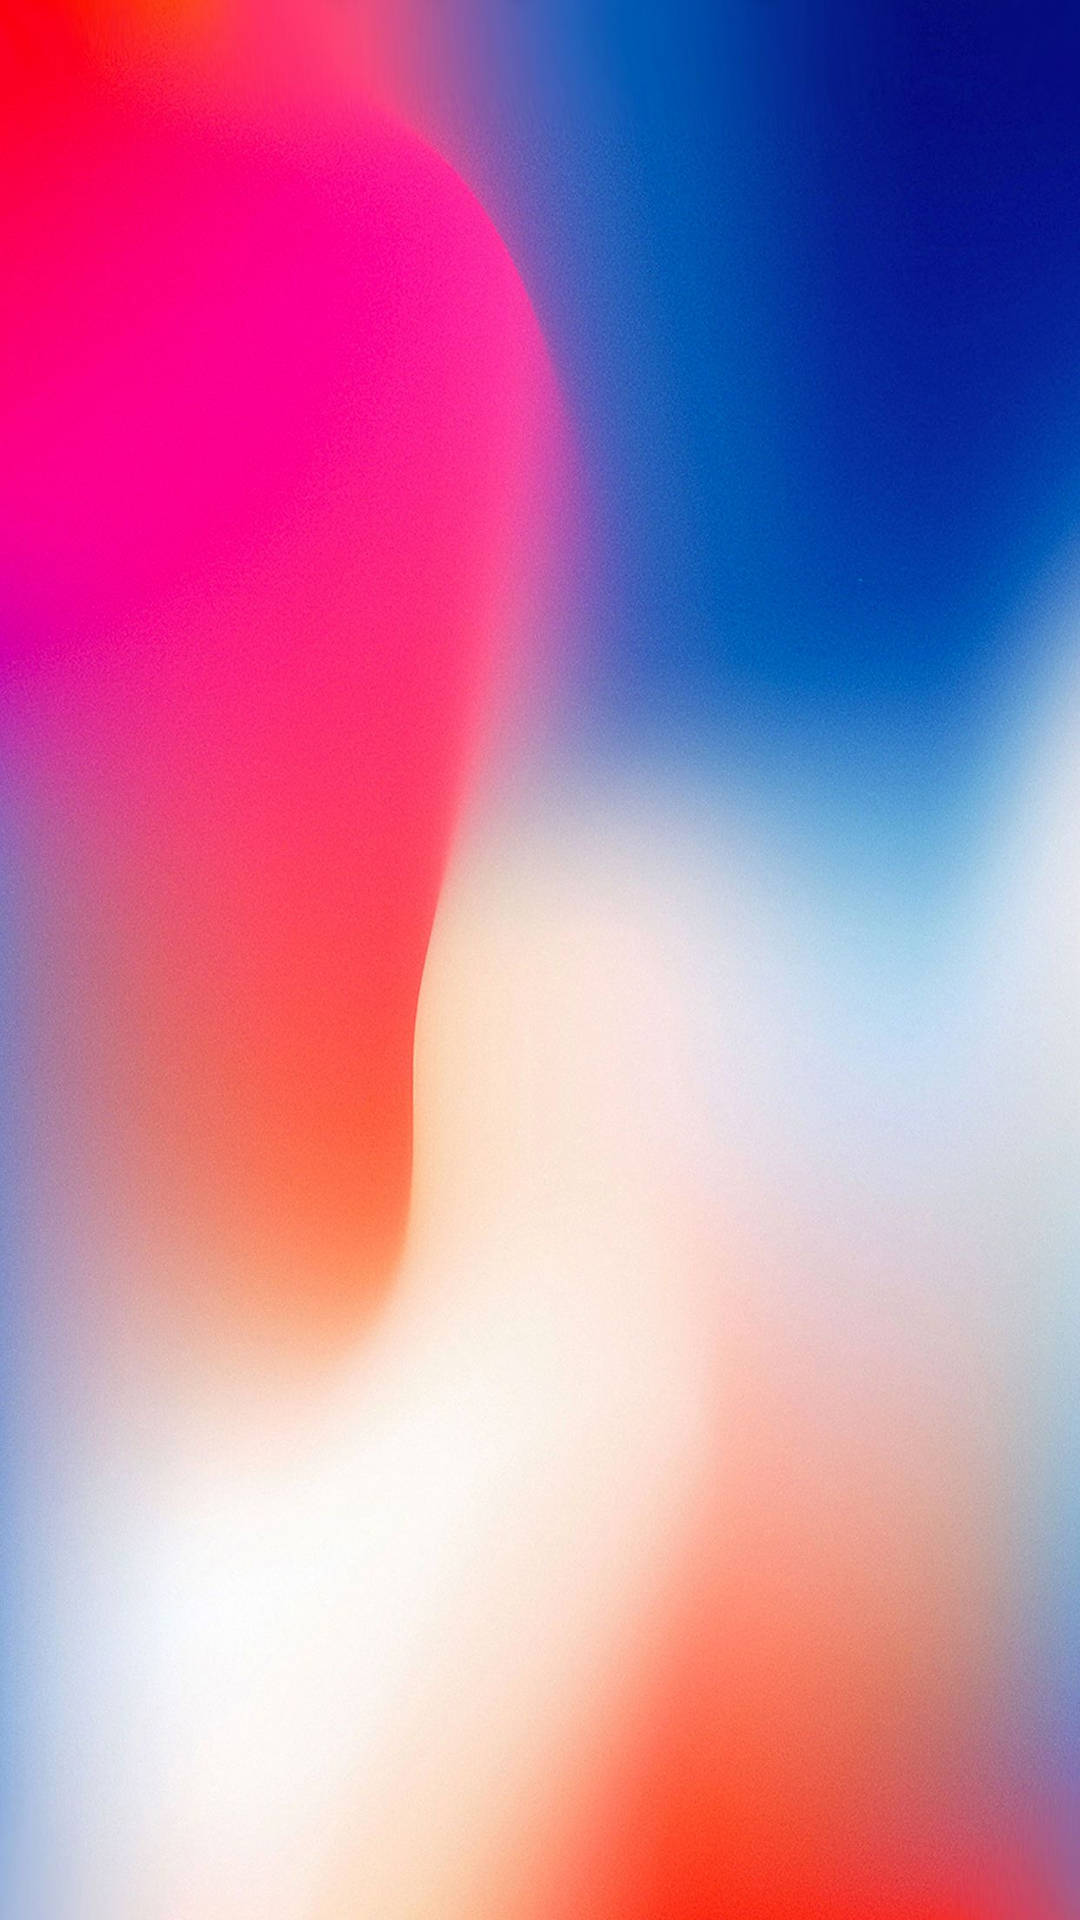 Bright and Colorful Abstract iPhone Digital Art Wallpaper